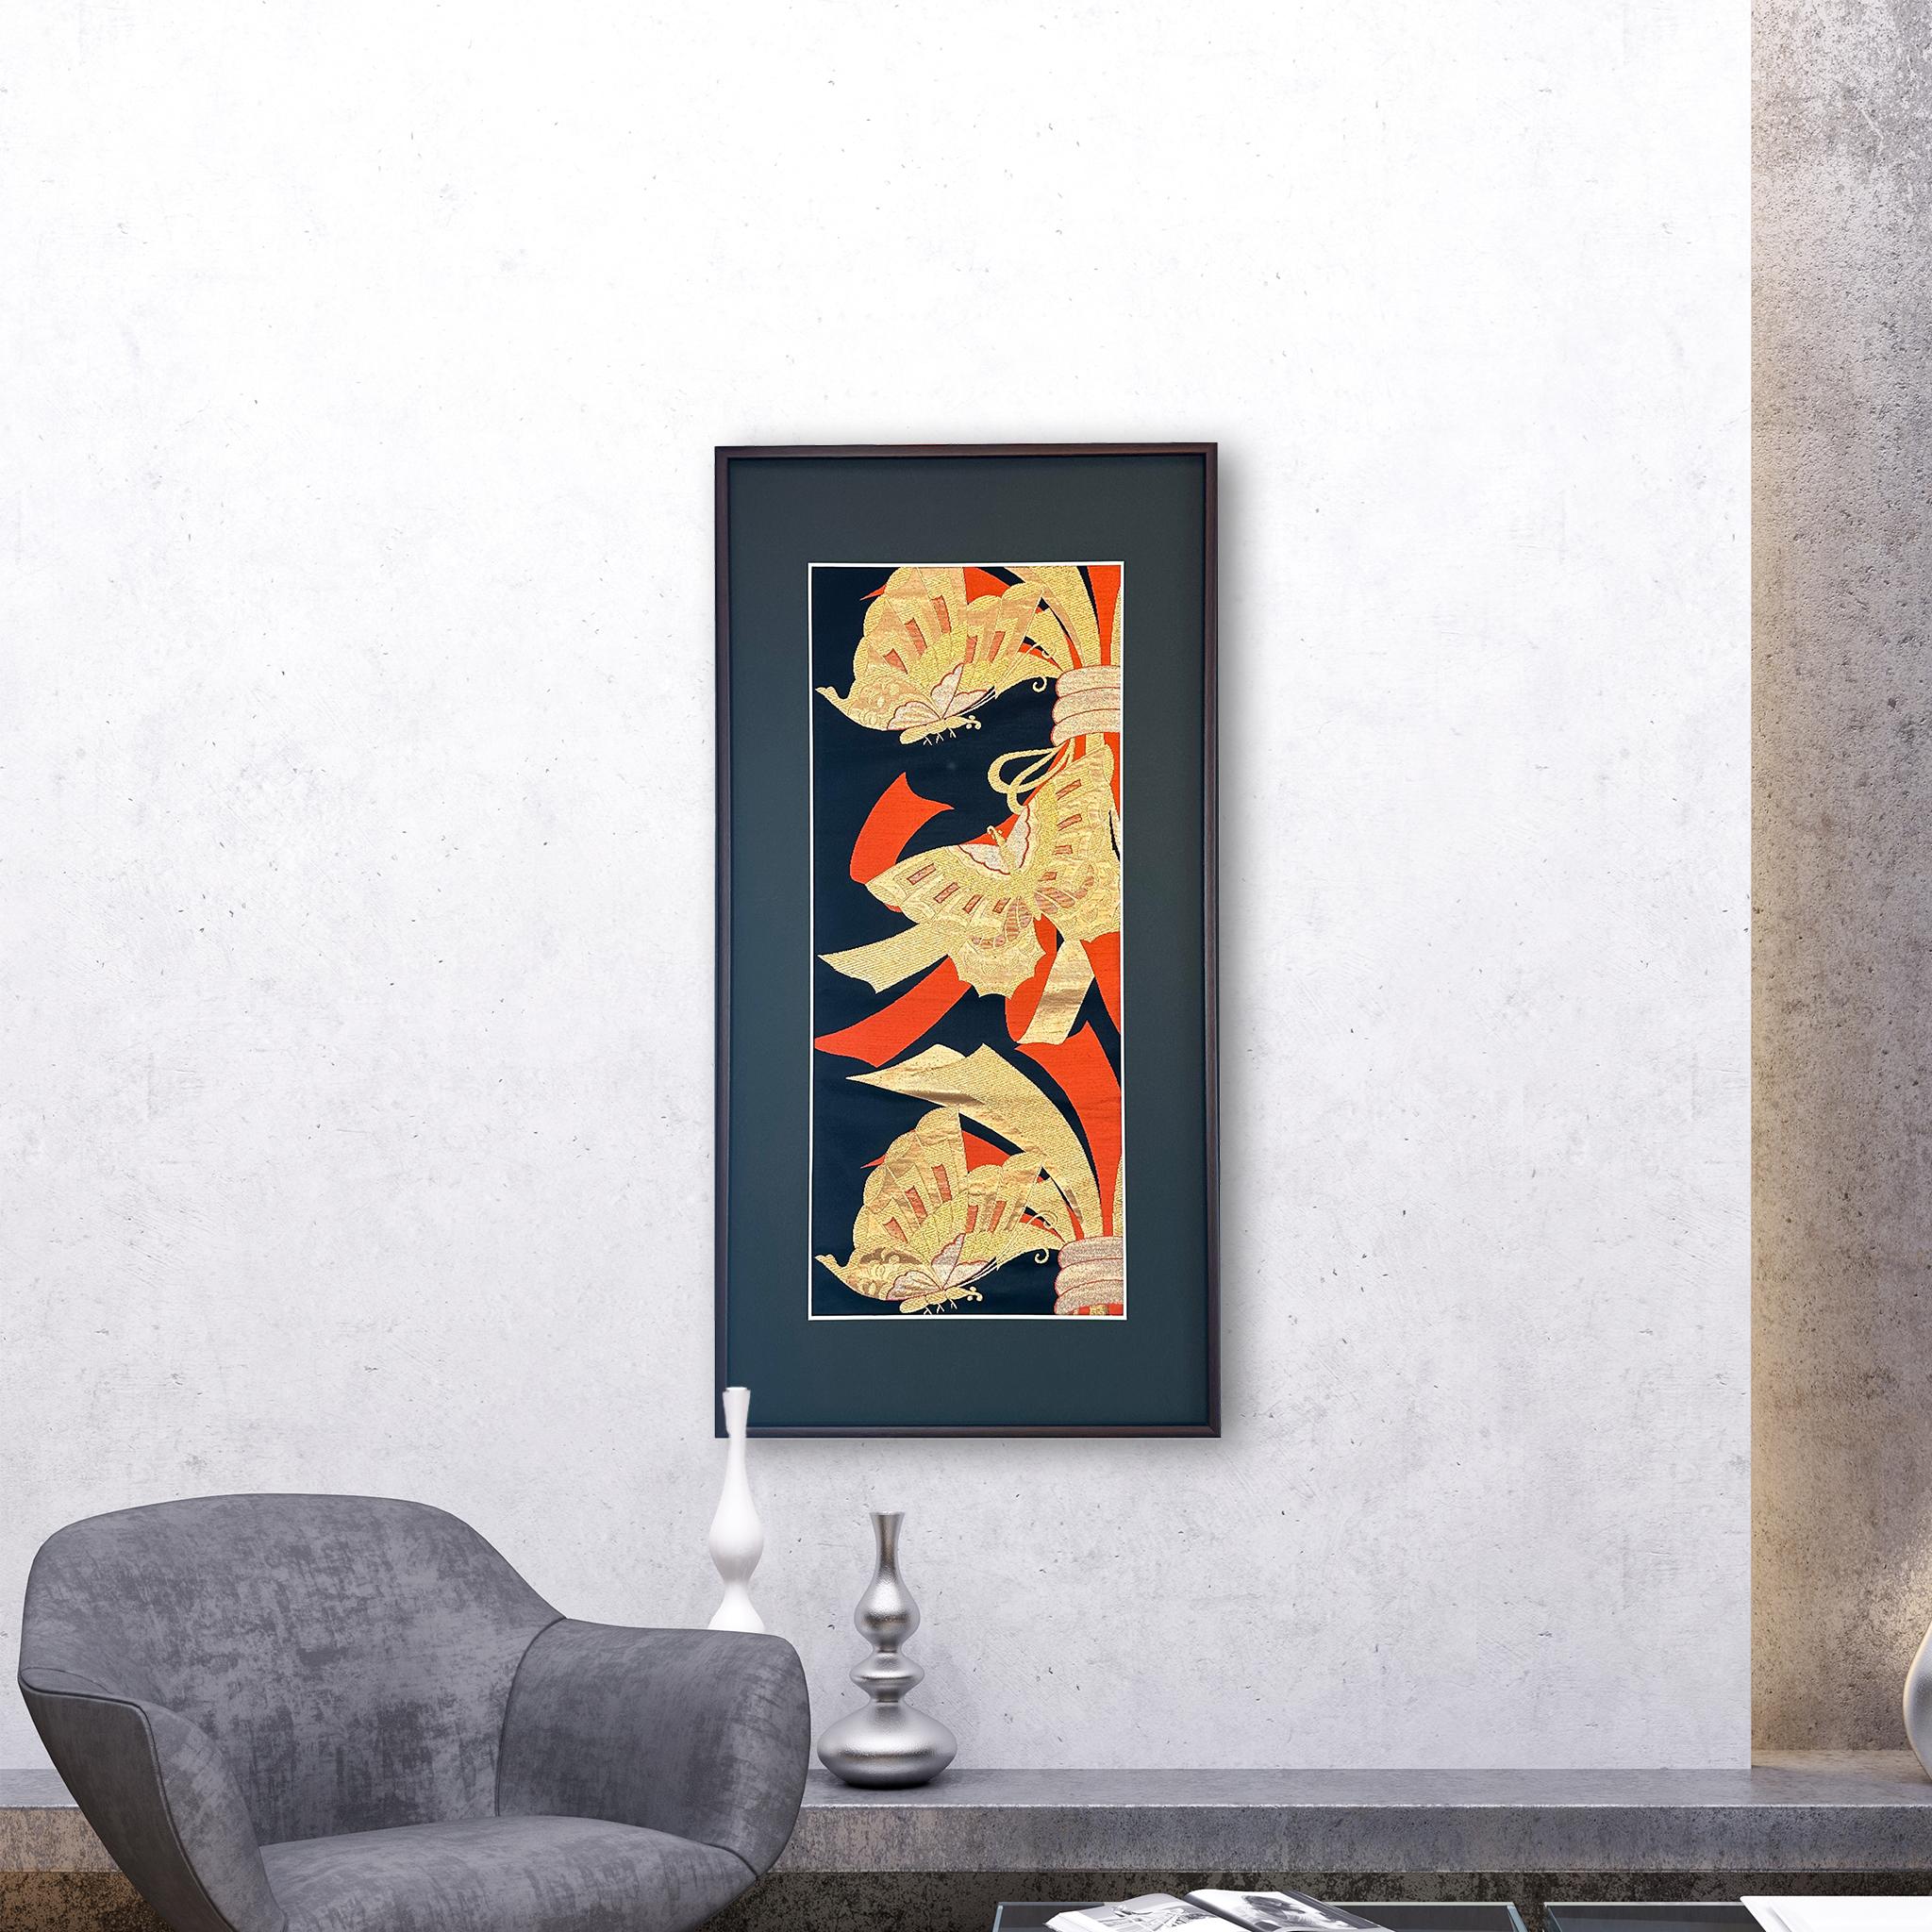 This Wall Decoration is a textile art where a kimono obi has been framed. We named this Kimono Art 